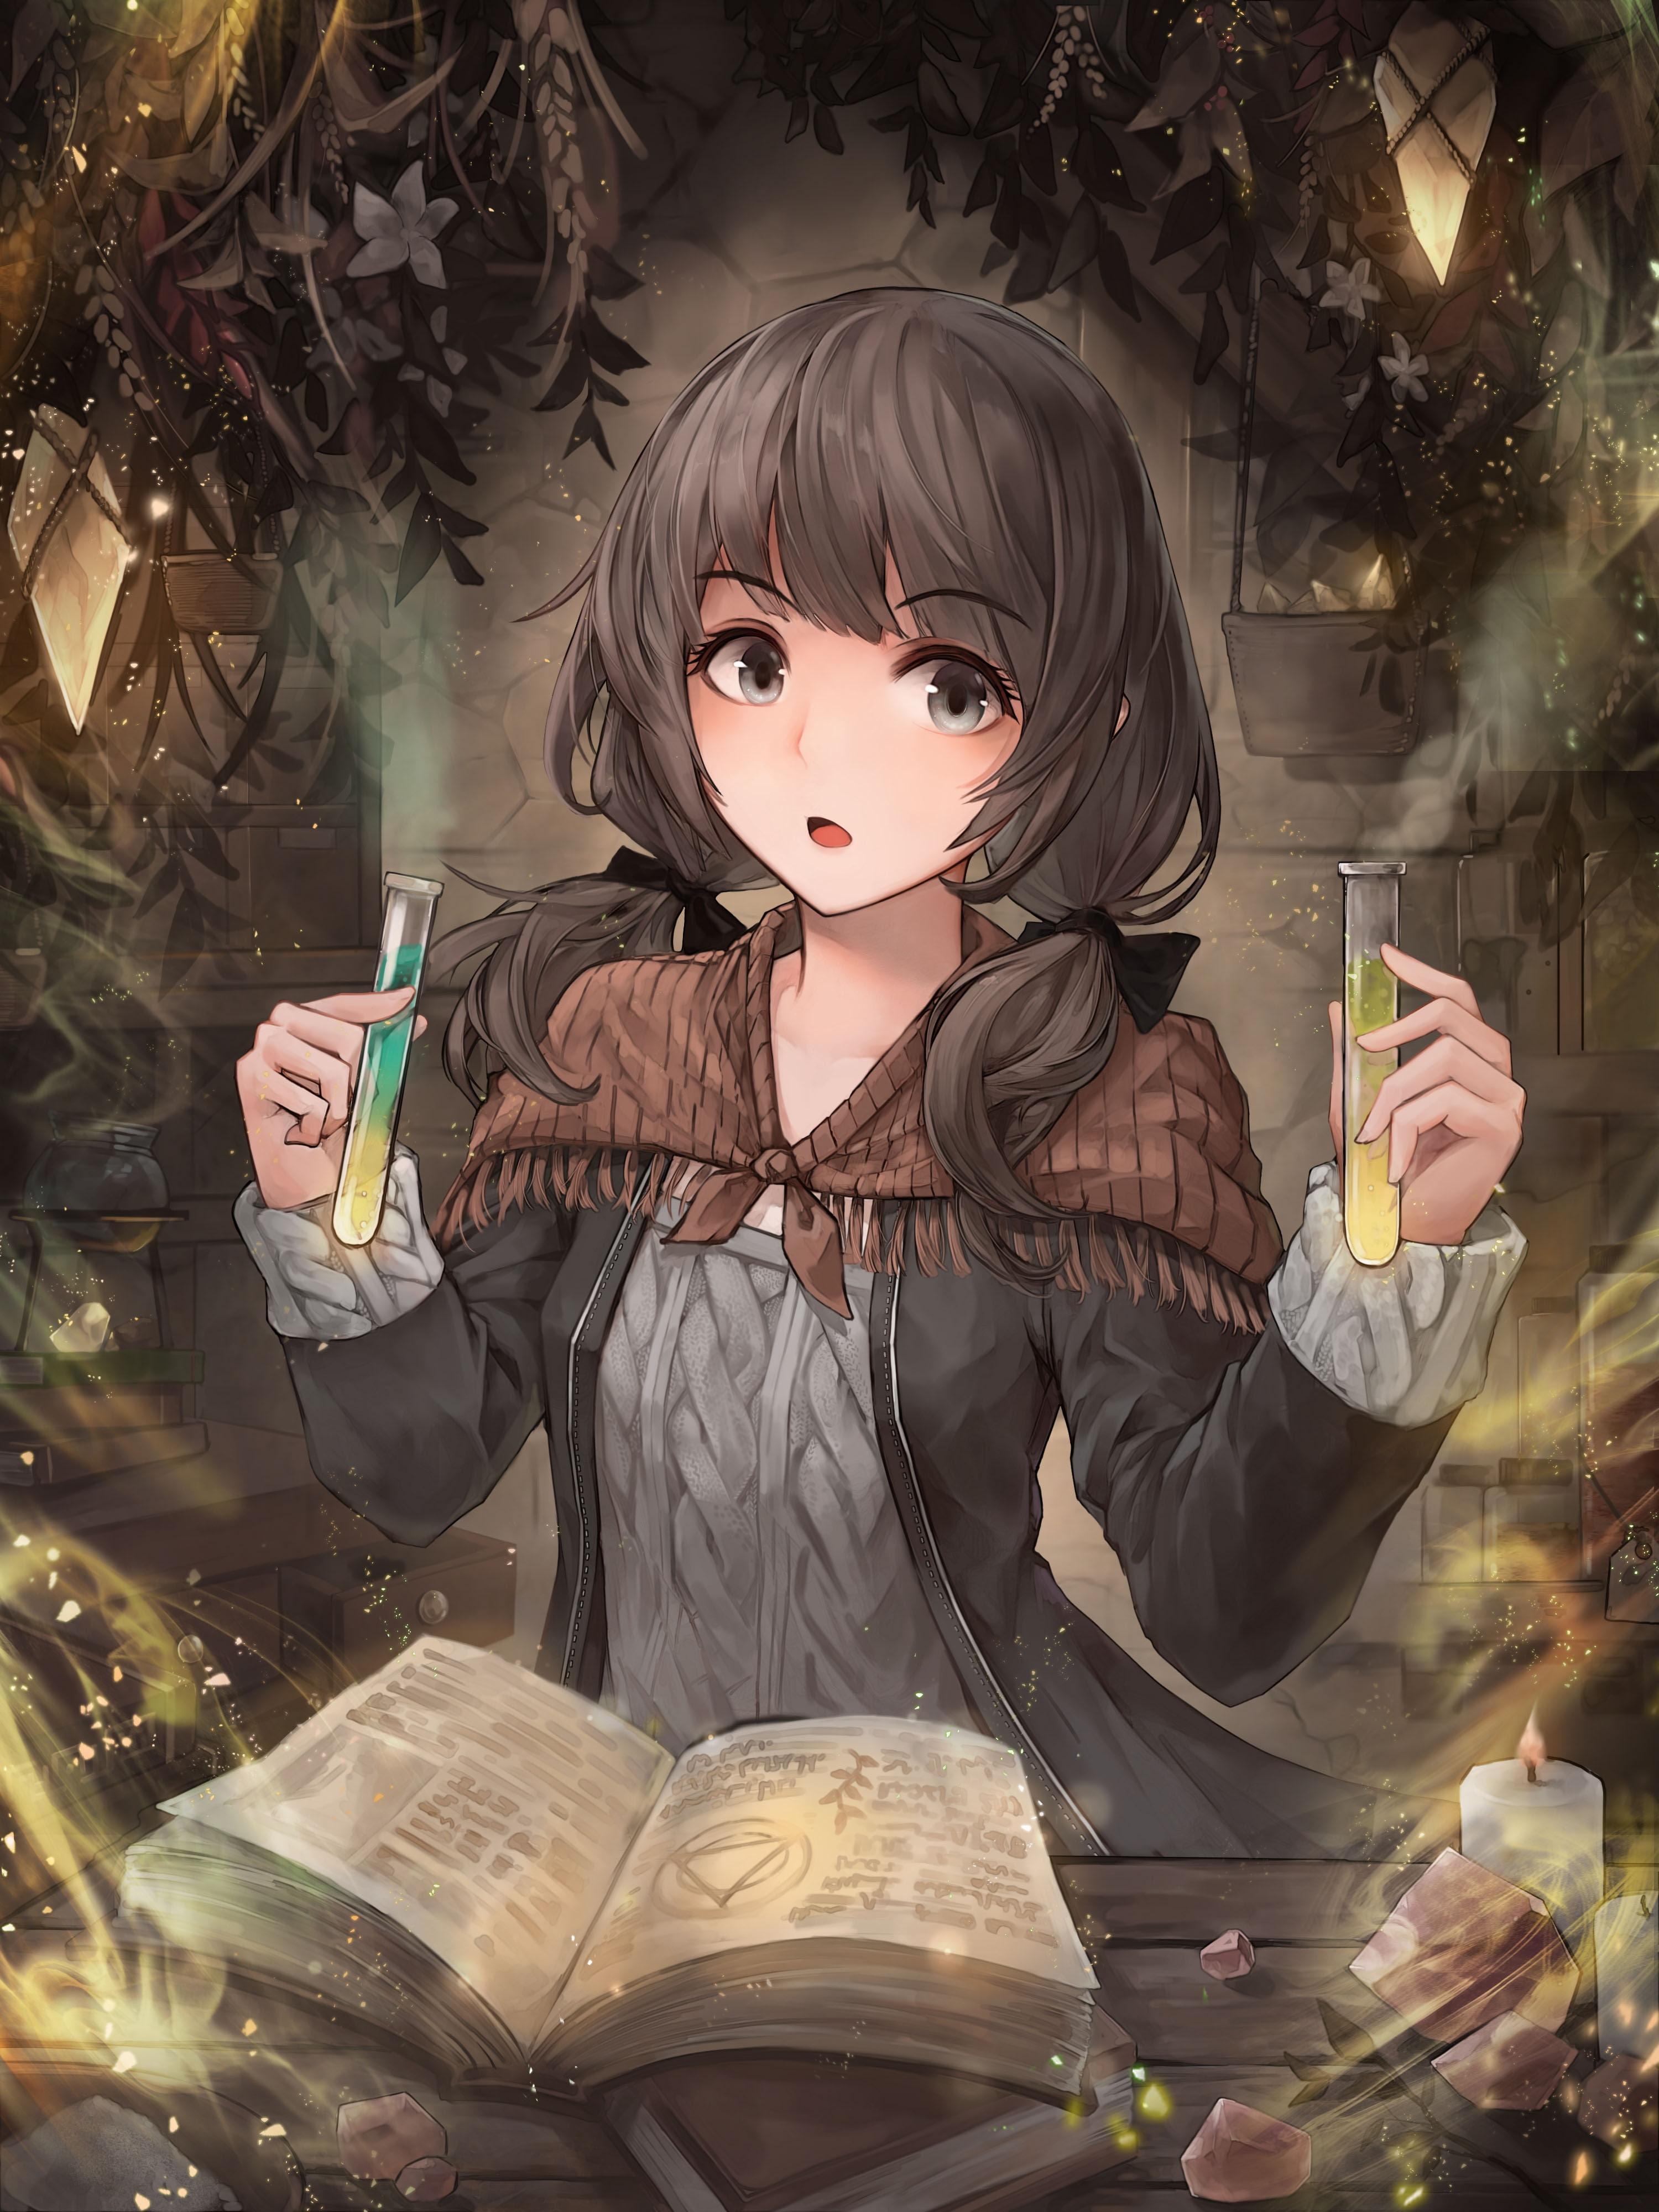 anime girl, magic, brown hair, spell book, one person, looking at camera